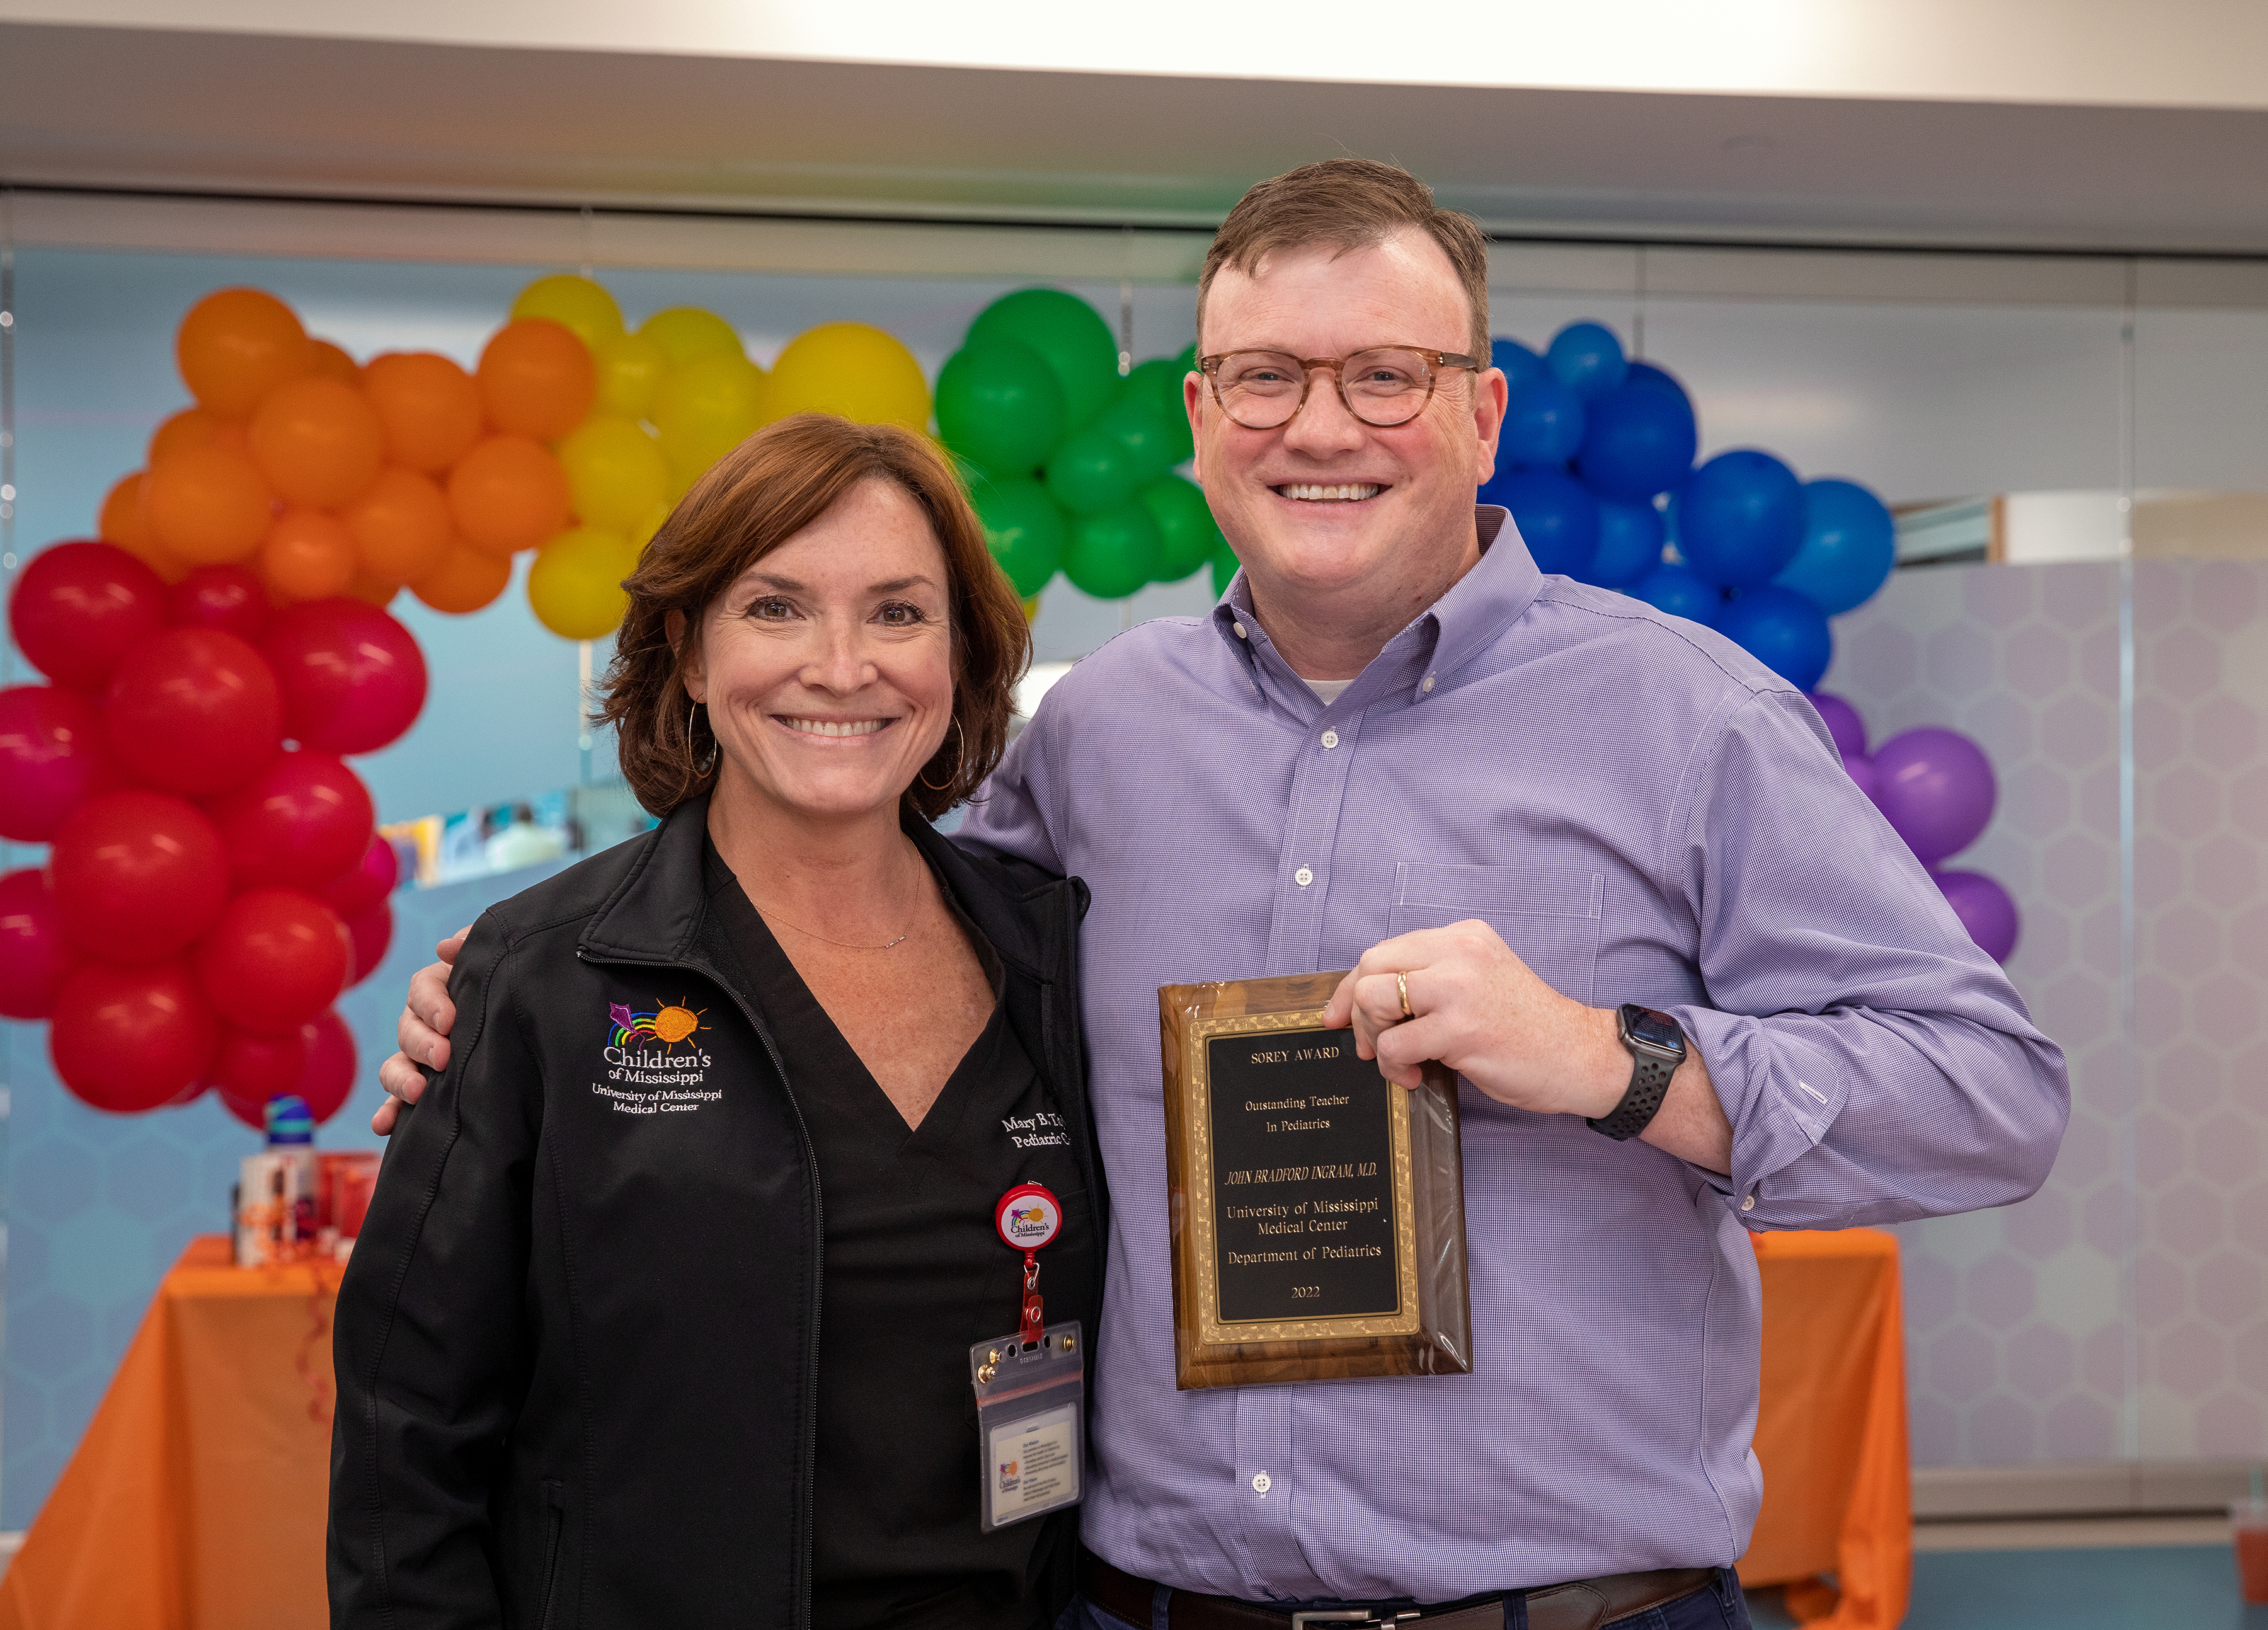 Dr. Mary Taylor, Suzan B. Thames Chair and professor of pediatrics, congratulates Dr. Brad Ingram on winning the Sorey Award for Outstanding Faculty Teacher during the Department of Pediatrics annual Awards Day.